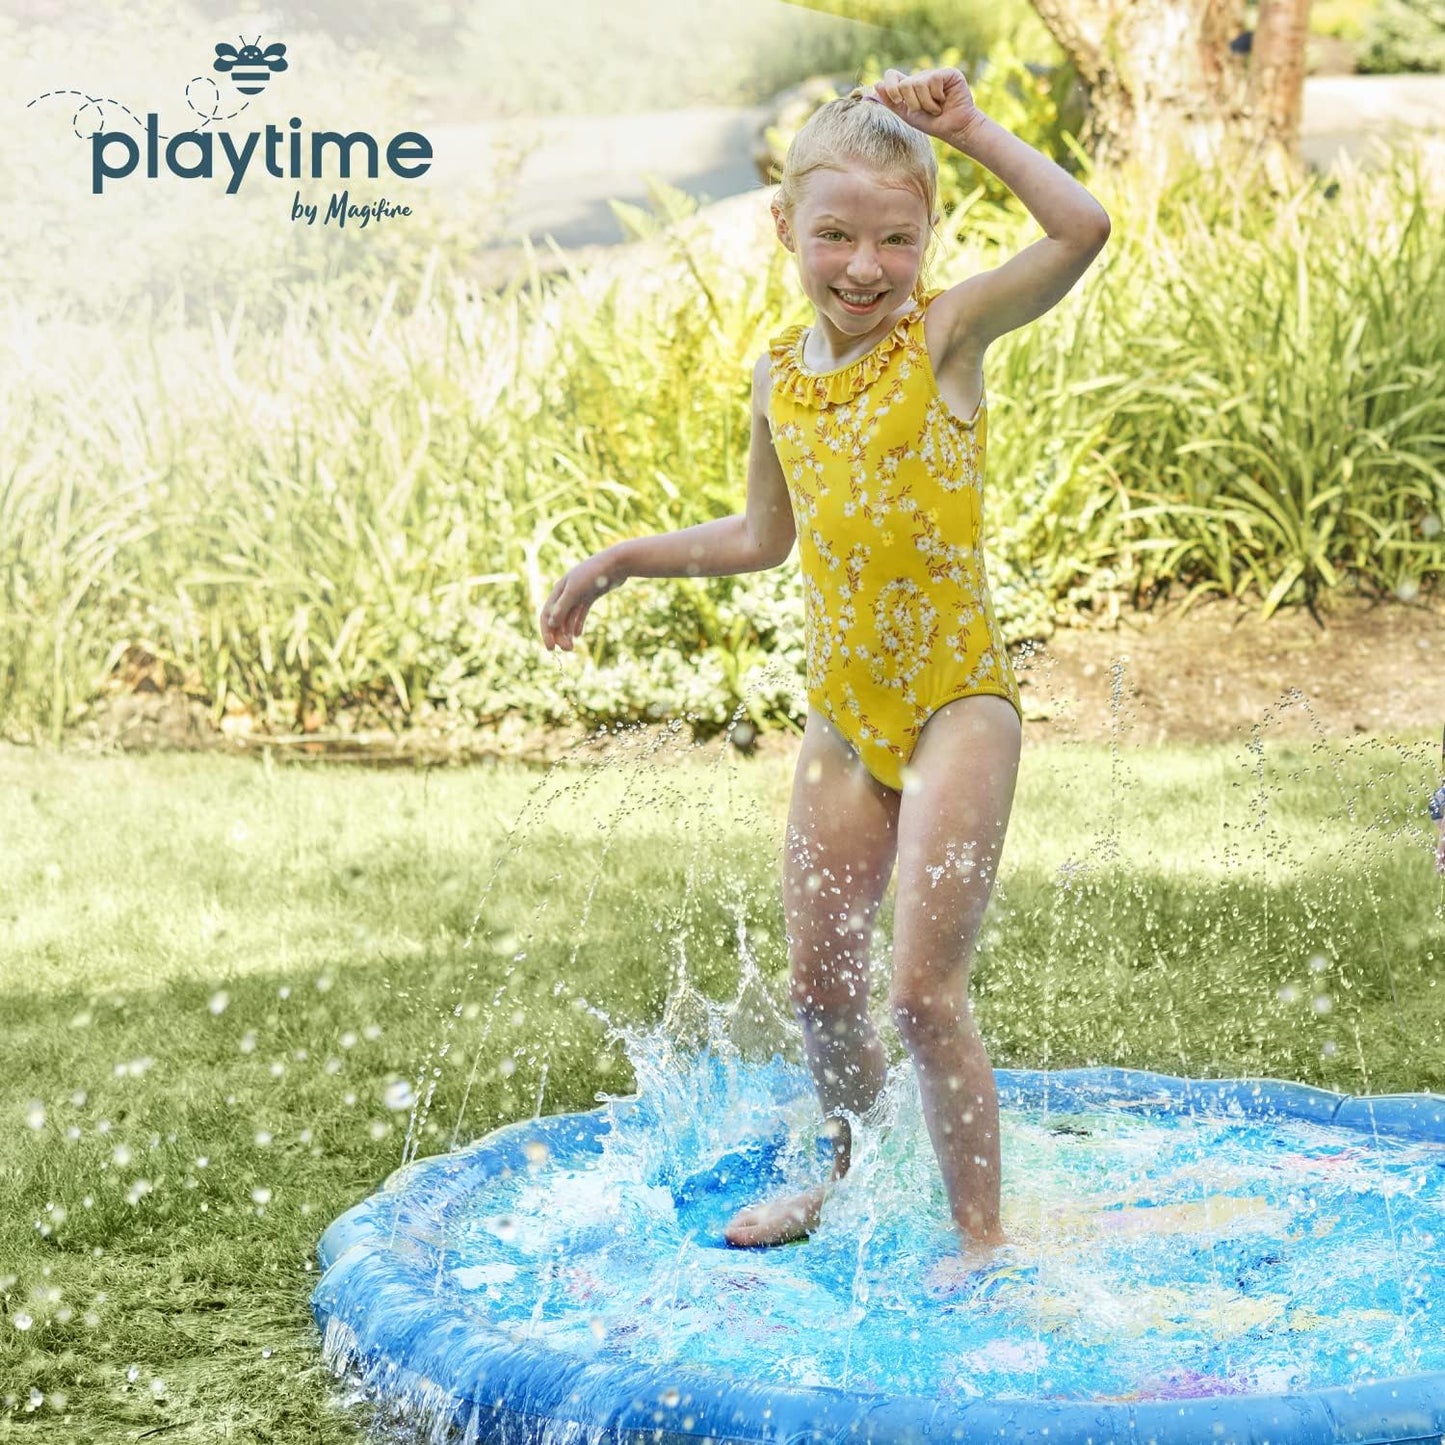 Sprinkler Splash Pad for Toddlers 1-3, 59 In., Water Toys for Dogs, Kids, Outdoor Baby Toys Ideal for Playtime and Cooling off Outside, Easy to Setup, Ideal for Summer and Backyard Activities